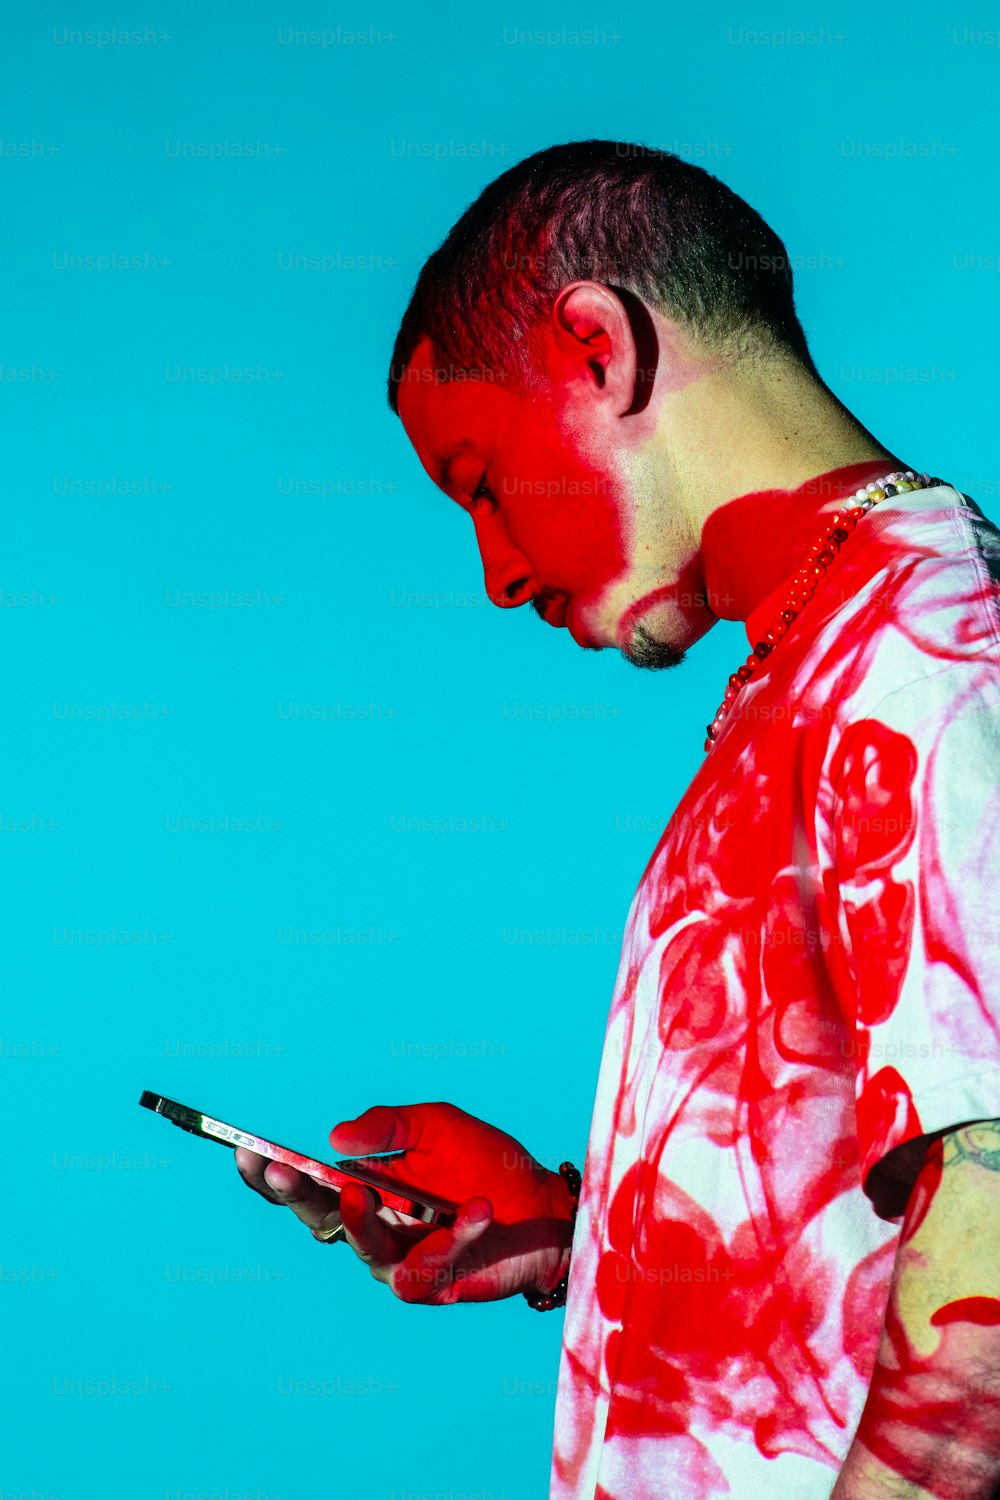 a man with red paint on his face using a cell phone